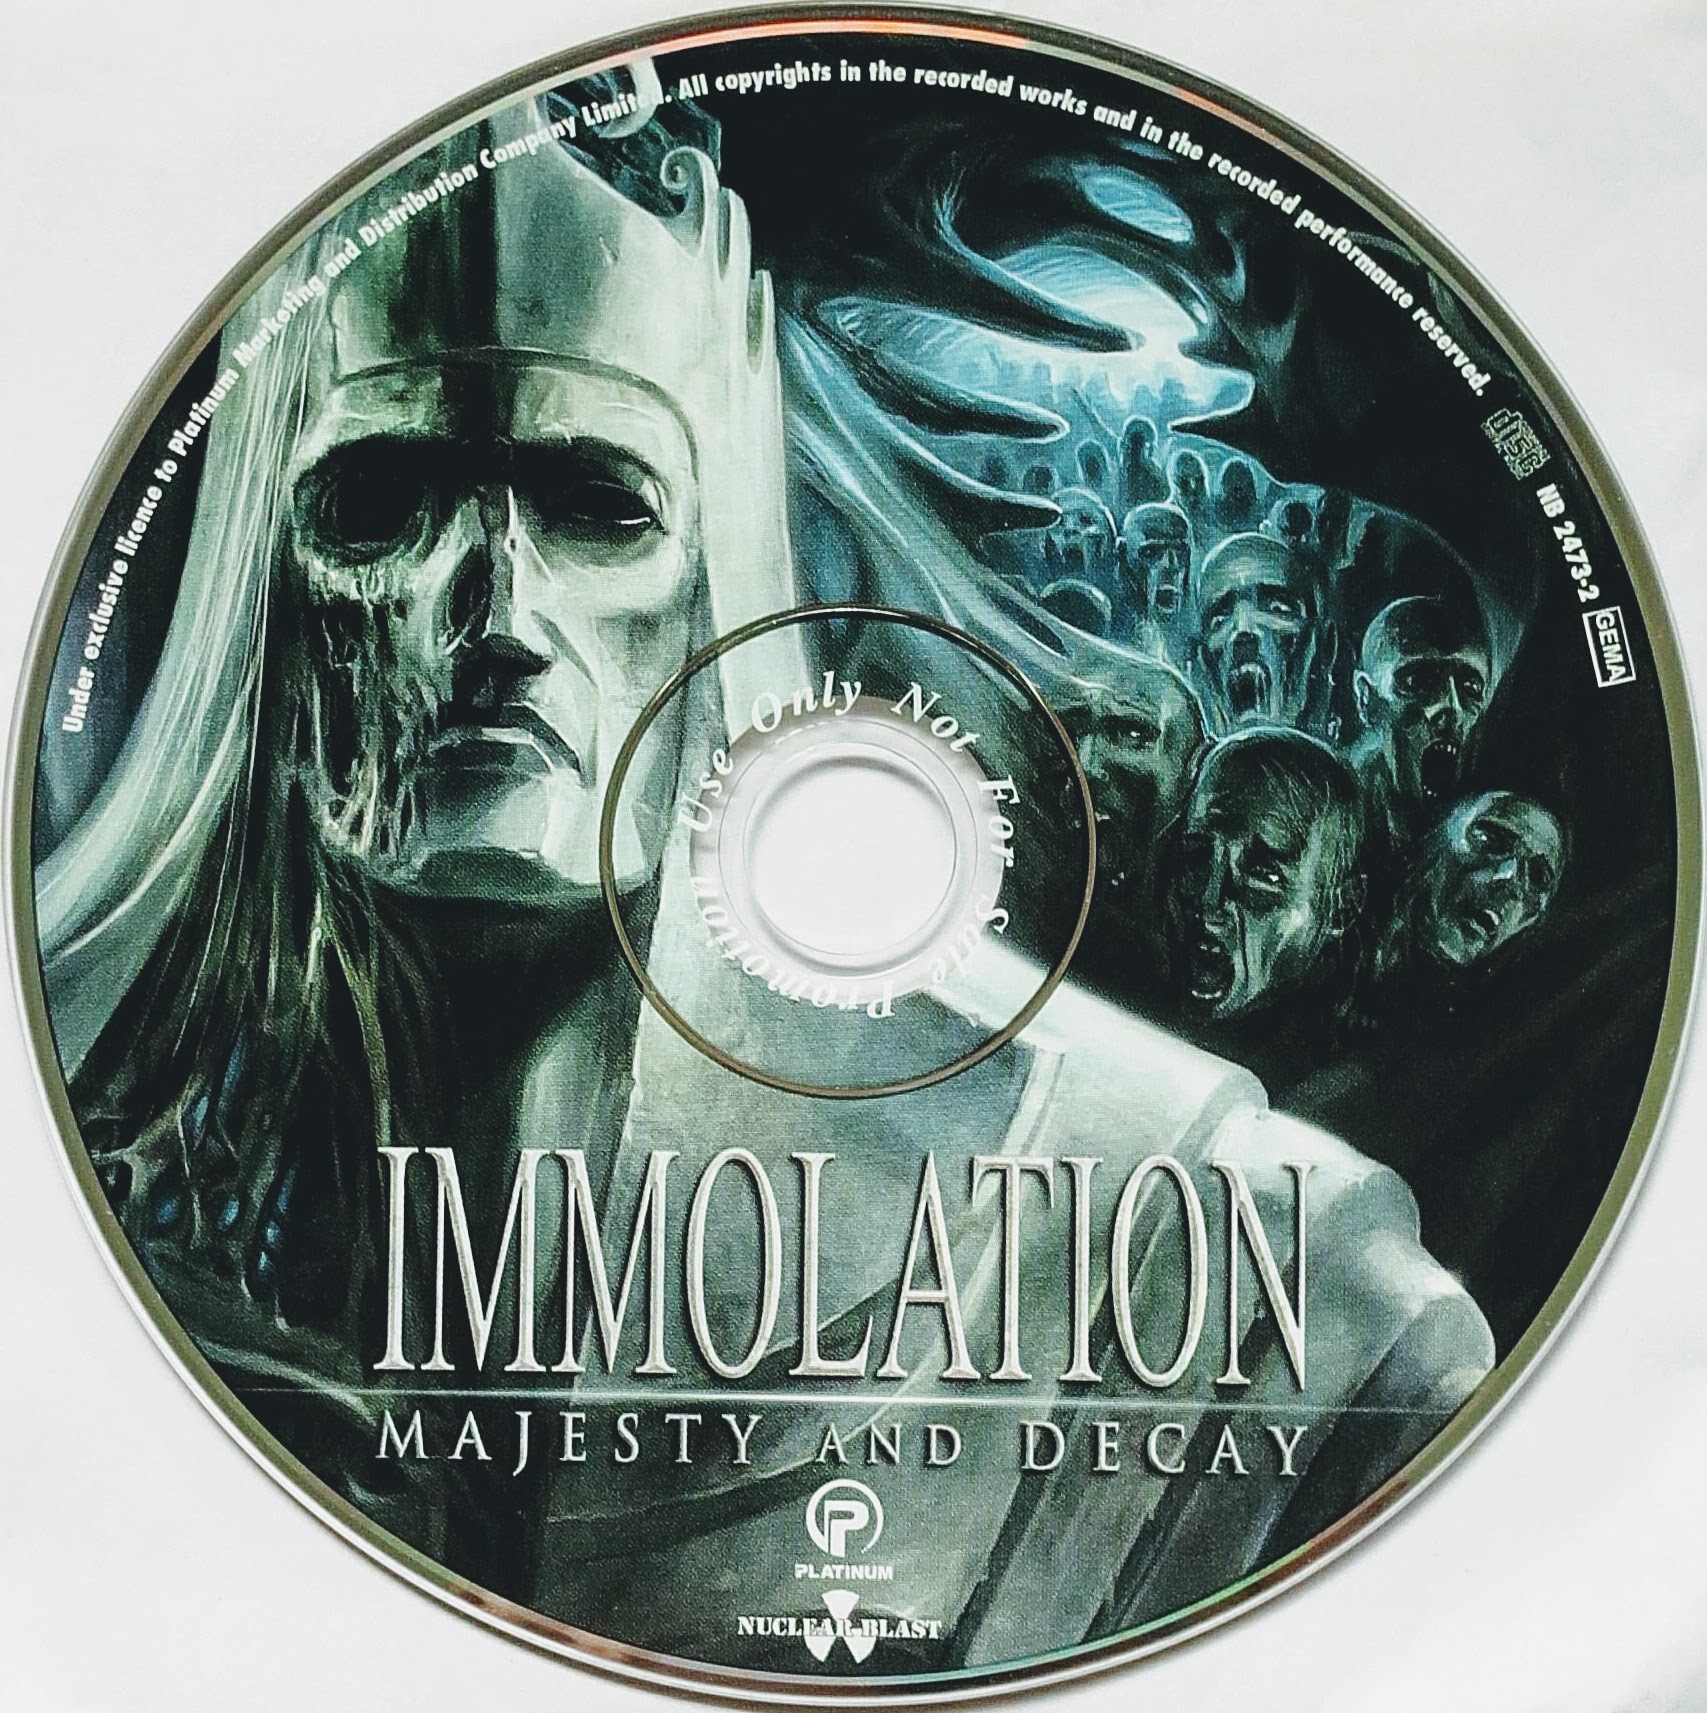 CD (Promotion) Immolation - Majesty And Decay (CD Only)